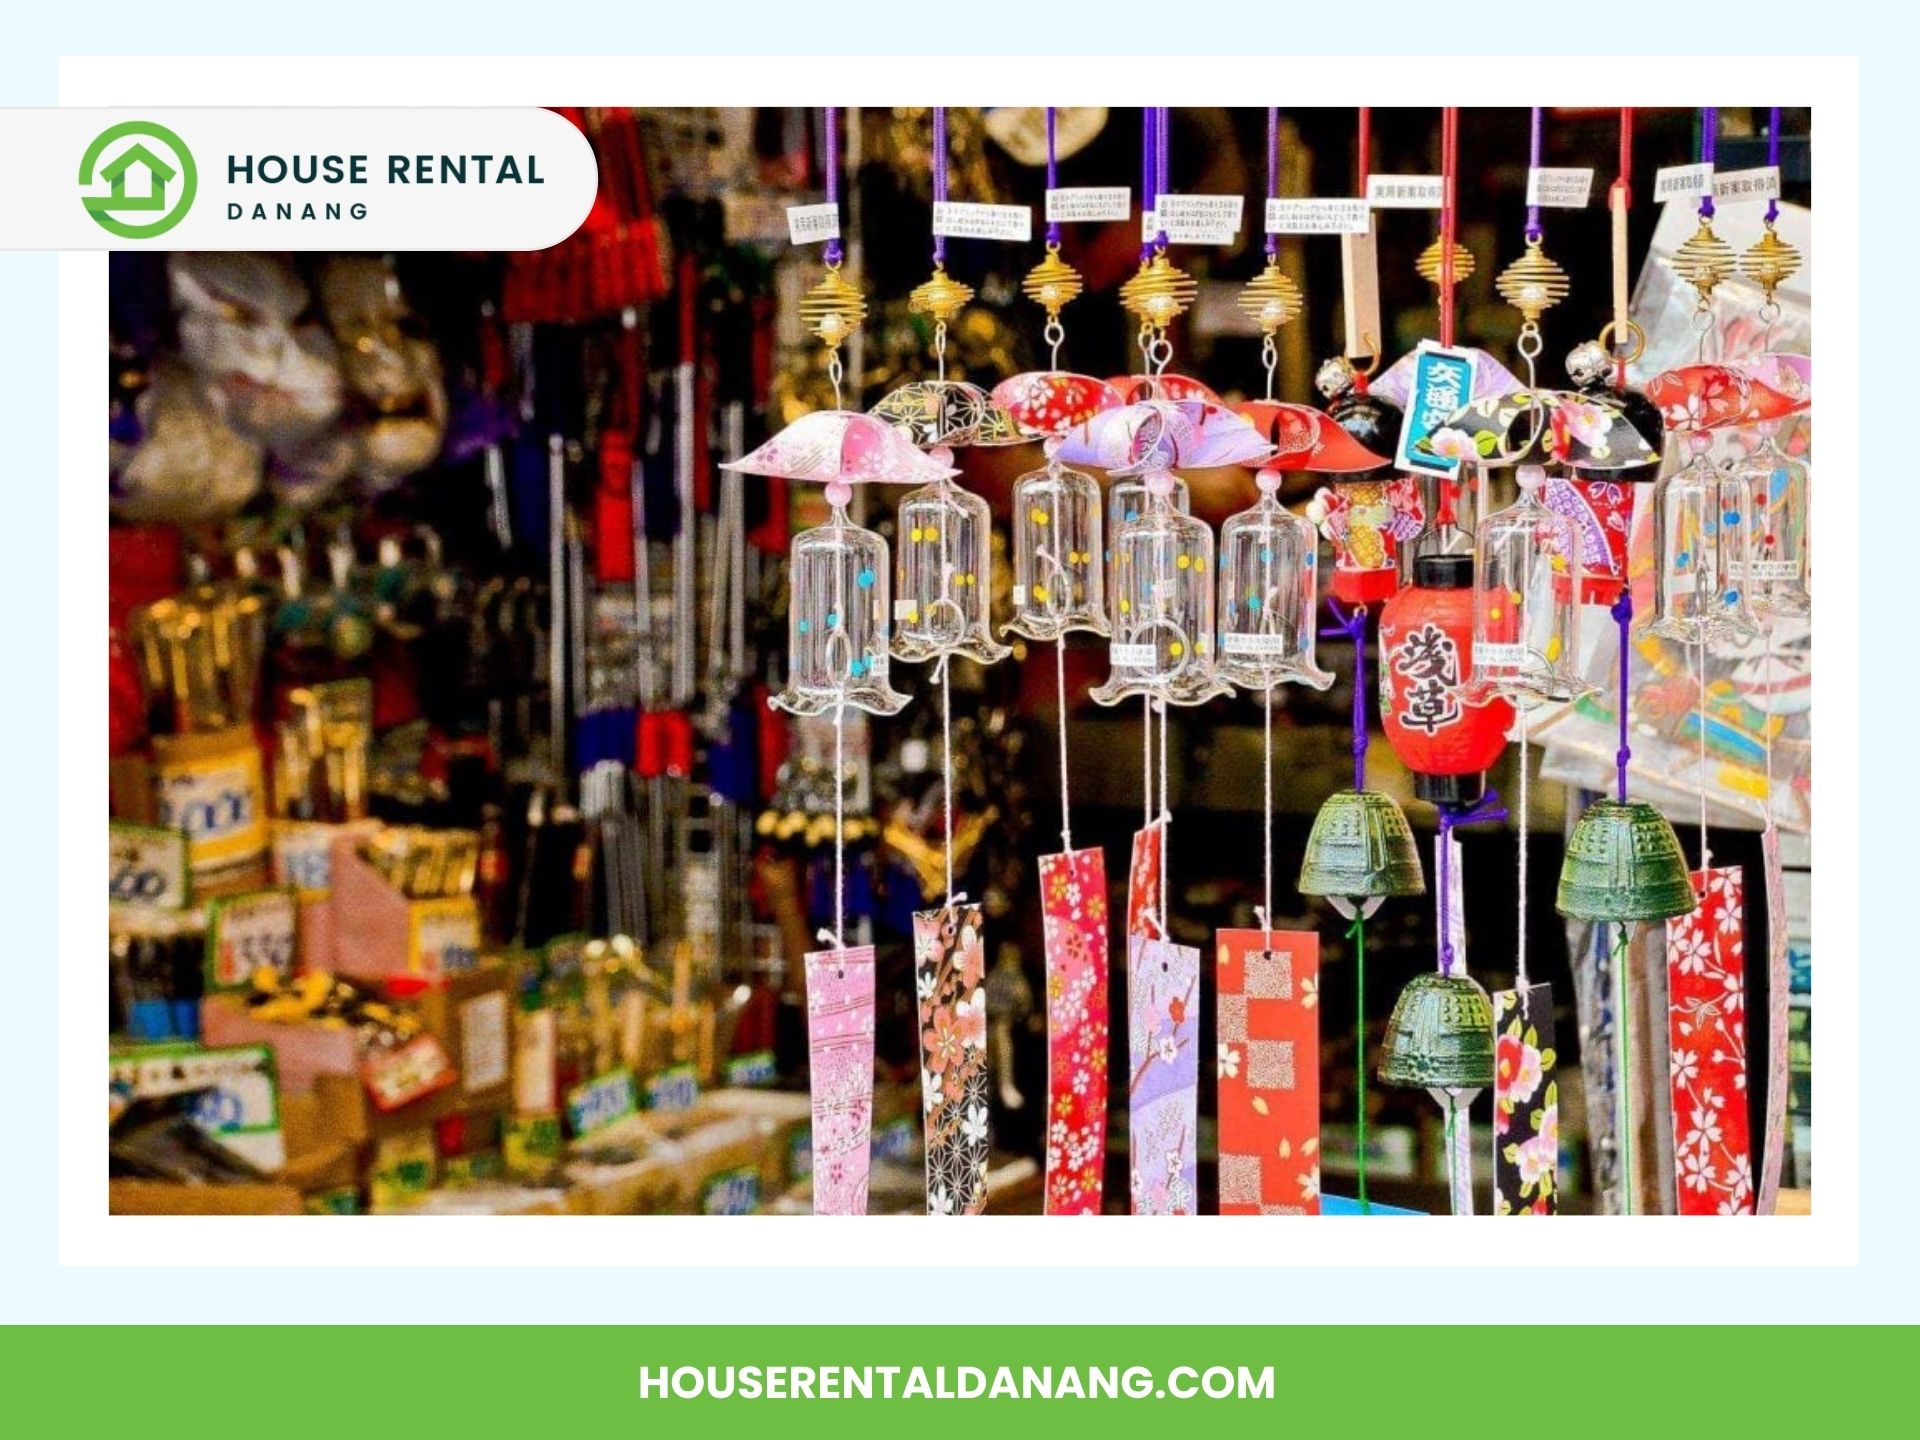 A variety of traditional Japanese wind chimes are displayed in a shop. They come in different colors and shapes, including bells and origami designs. This charming spot is among the best places for shopping in Da Nang, offering a unique array of items in the background.